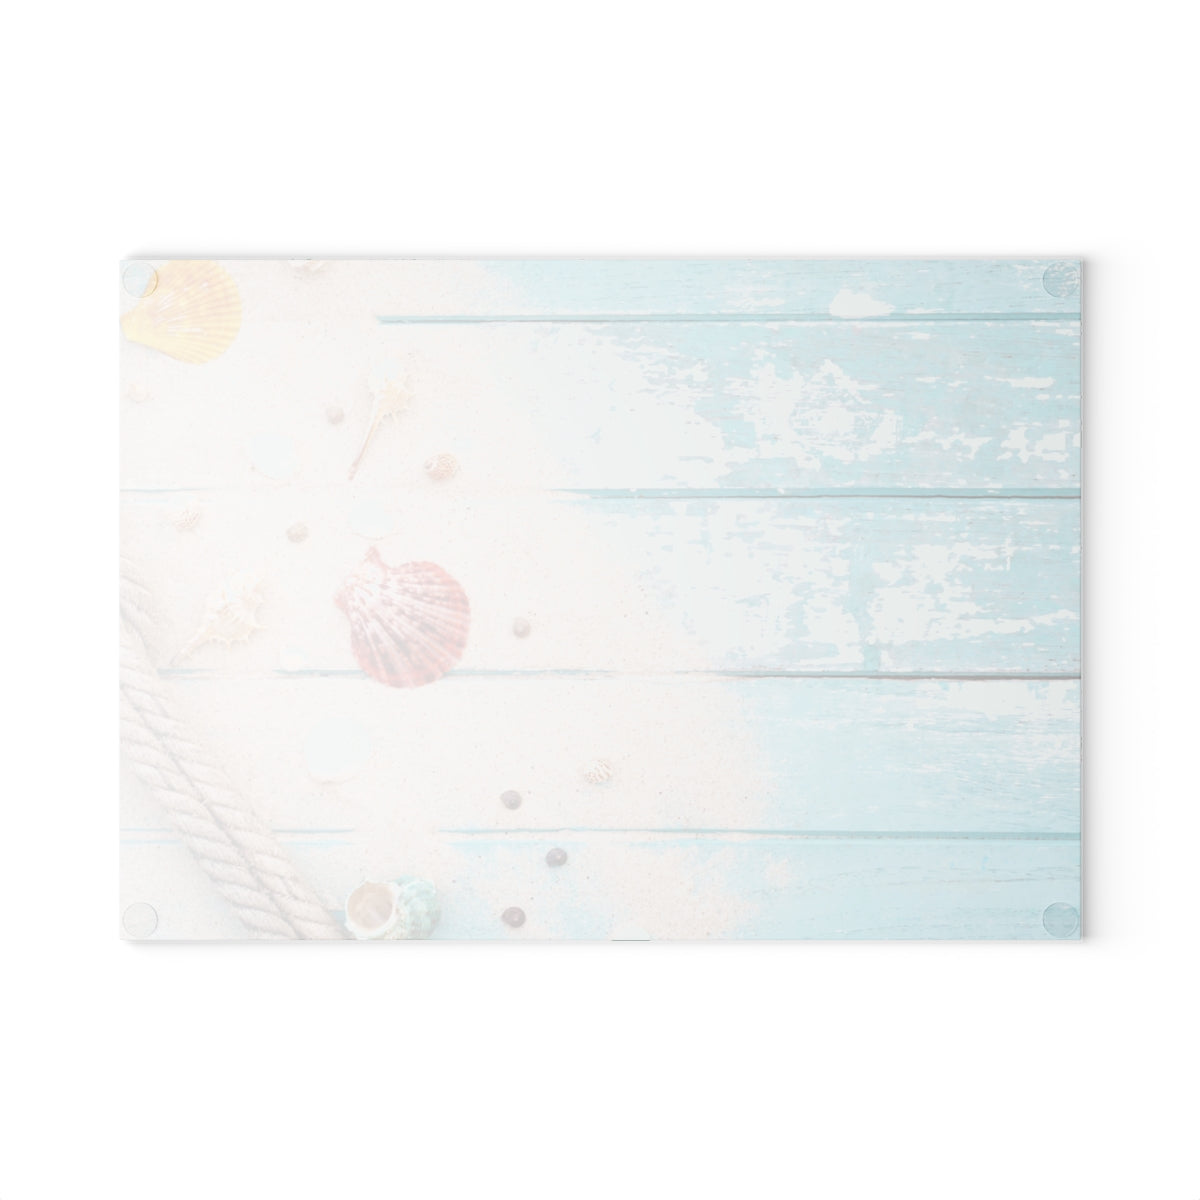 Glass Cutting Board, Boardwalk Shells - Two Sizes Available1